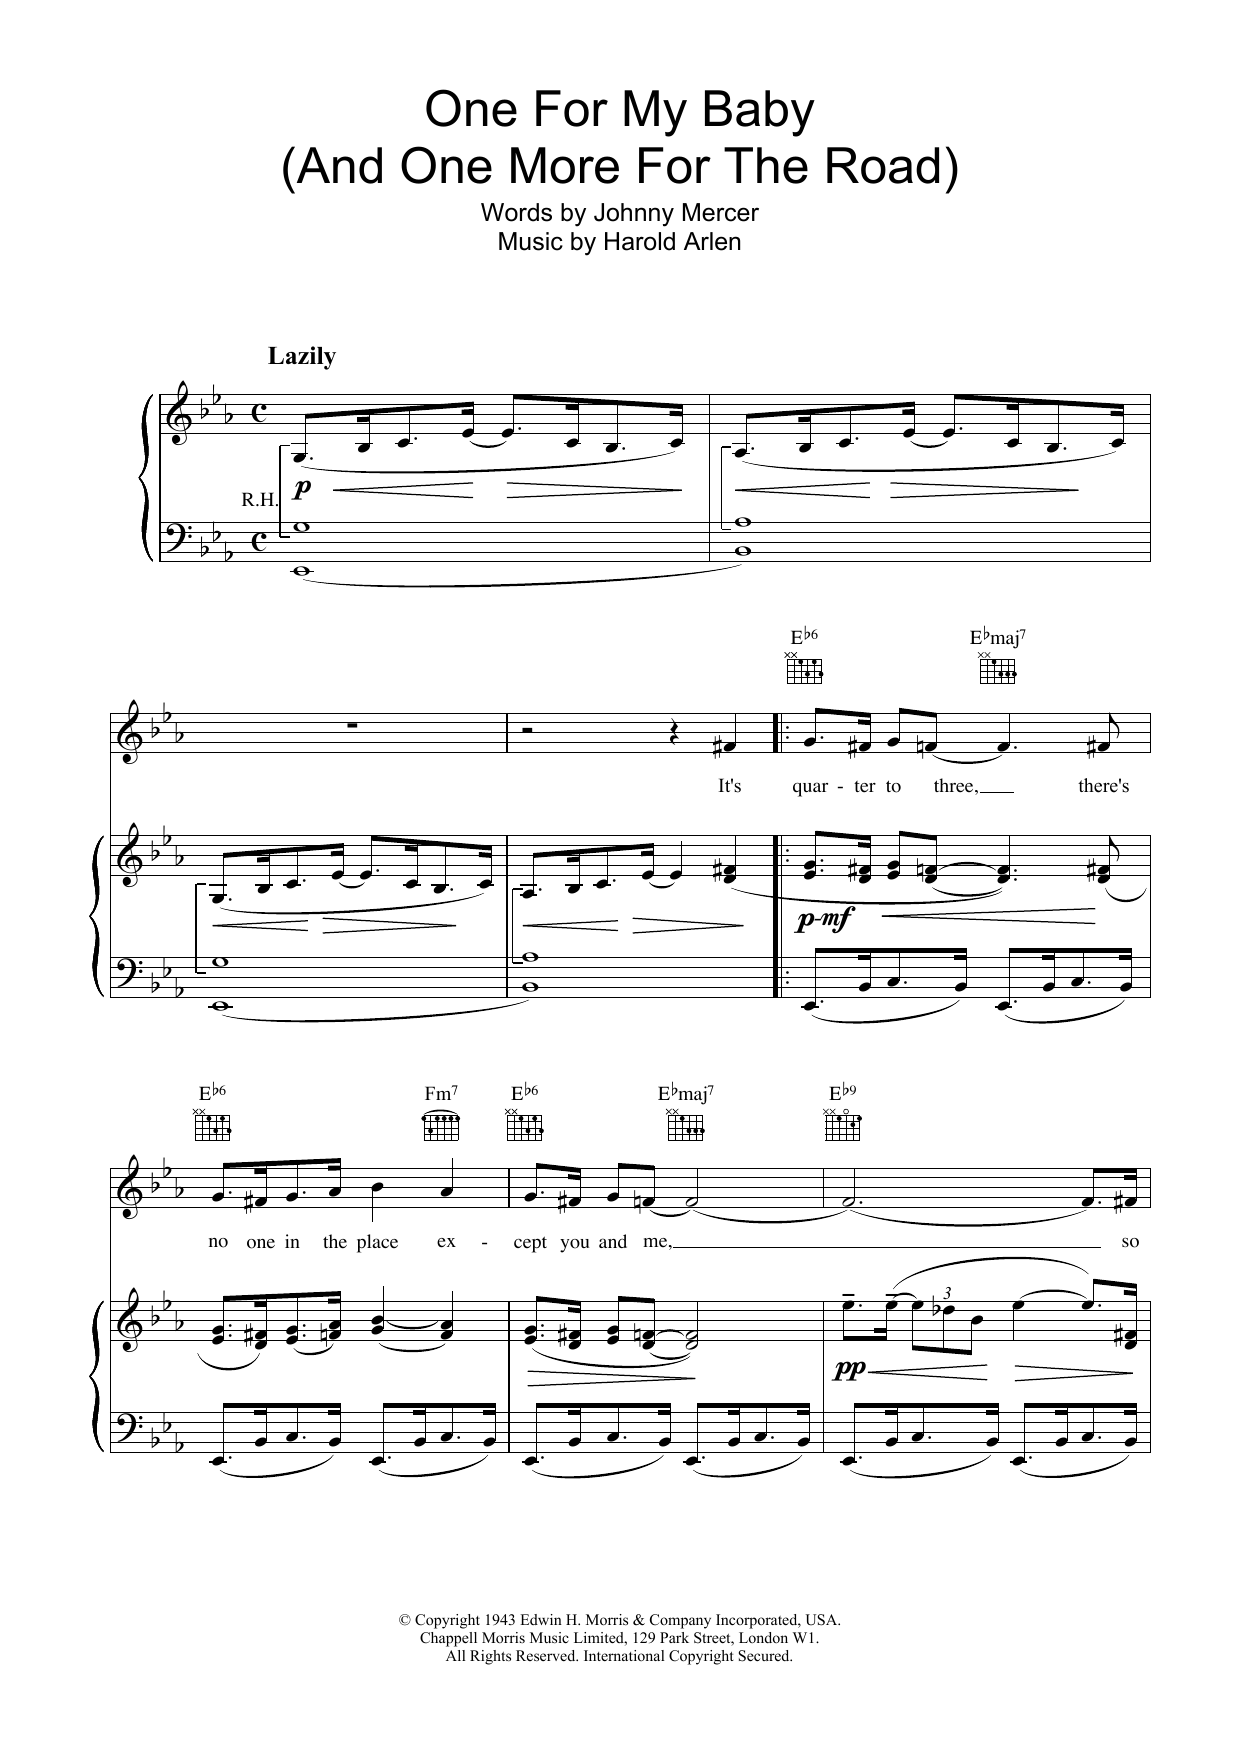 Frank Sinatra One For My Baby (And One More For The Road) sheet music notes and chords. Download Printable PDF.